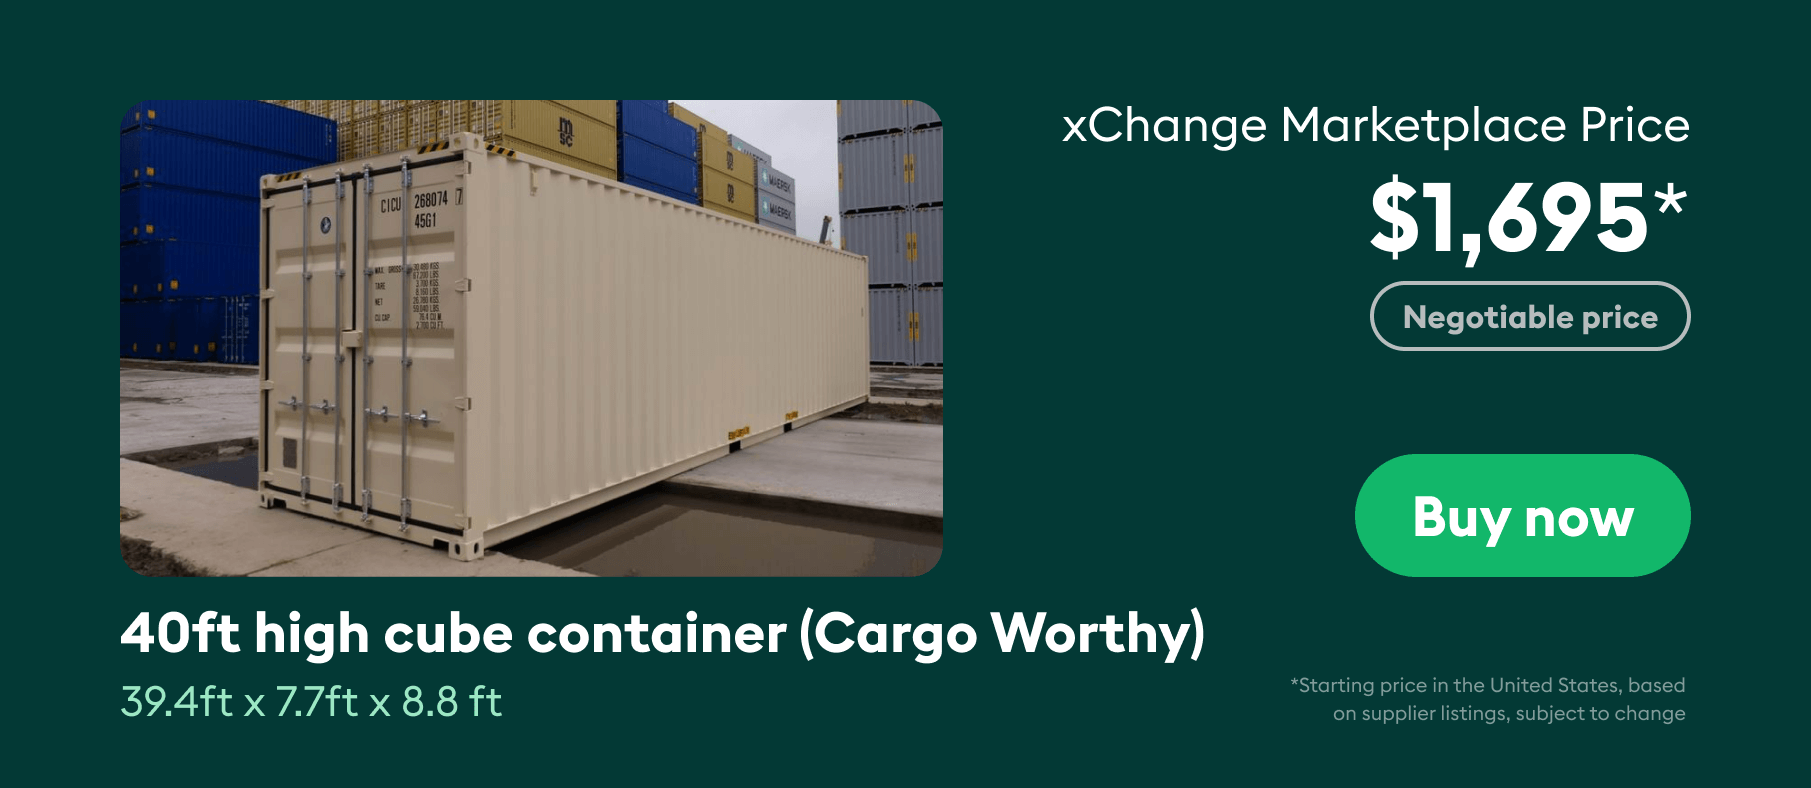 The xChange marketplace price of 40ft high cube used container is $1,695 and is negotiable.